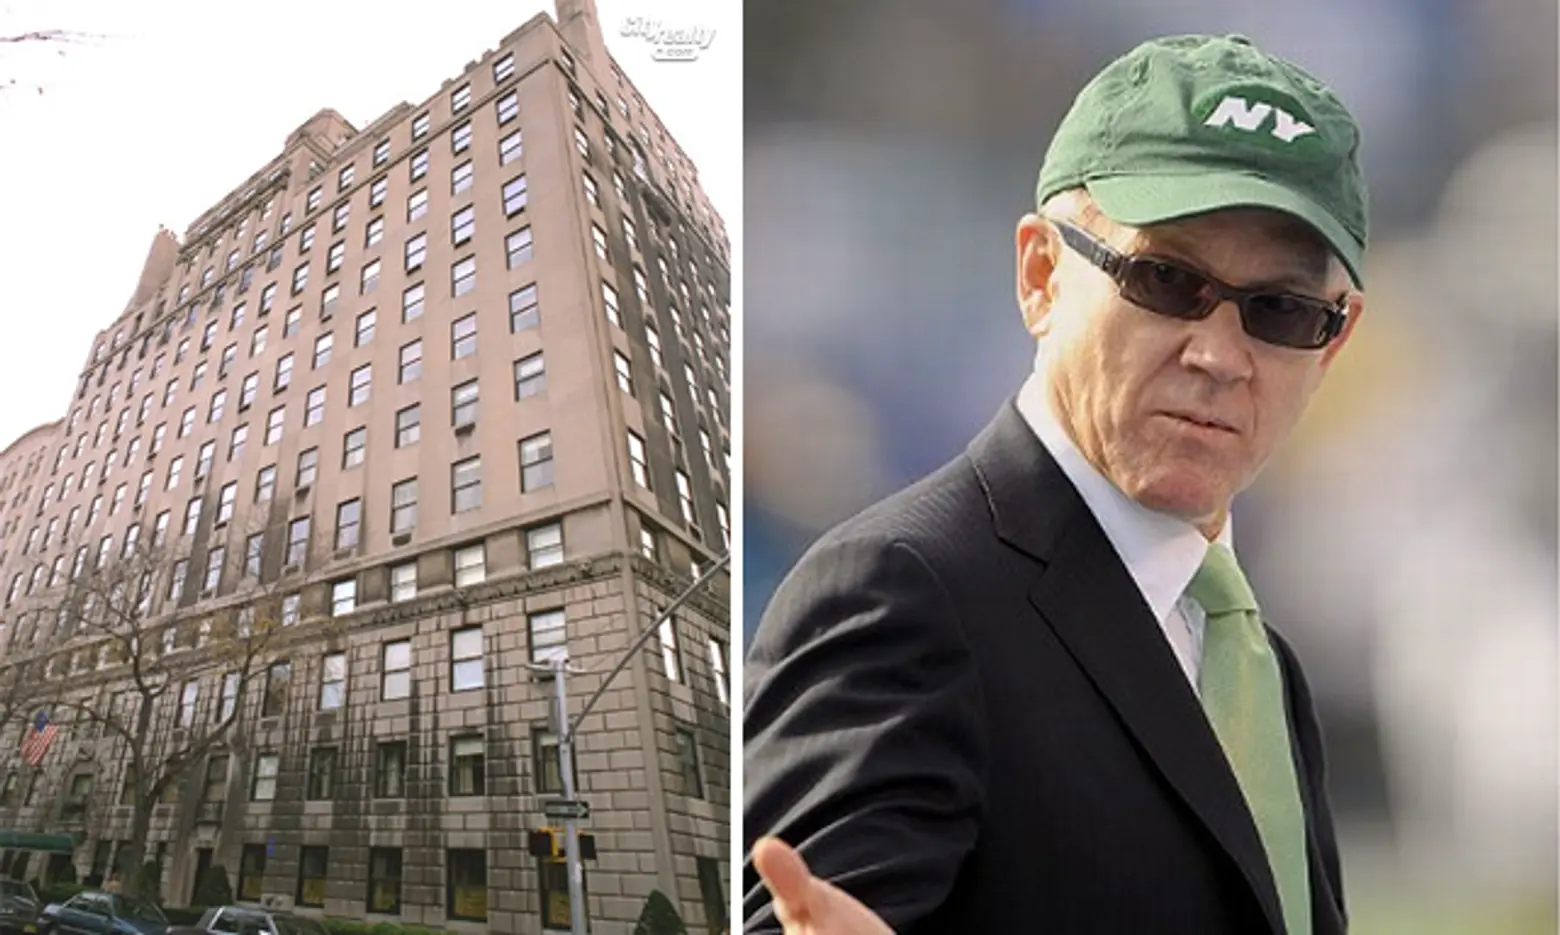 Woody Johnson’s Co-op Sale Still Sets Record, but Comes In Lower Than Expected at $77.5M